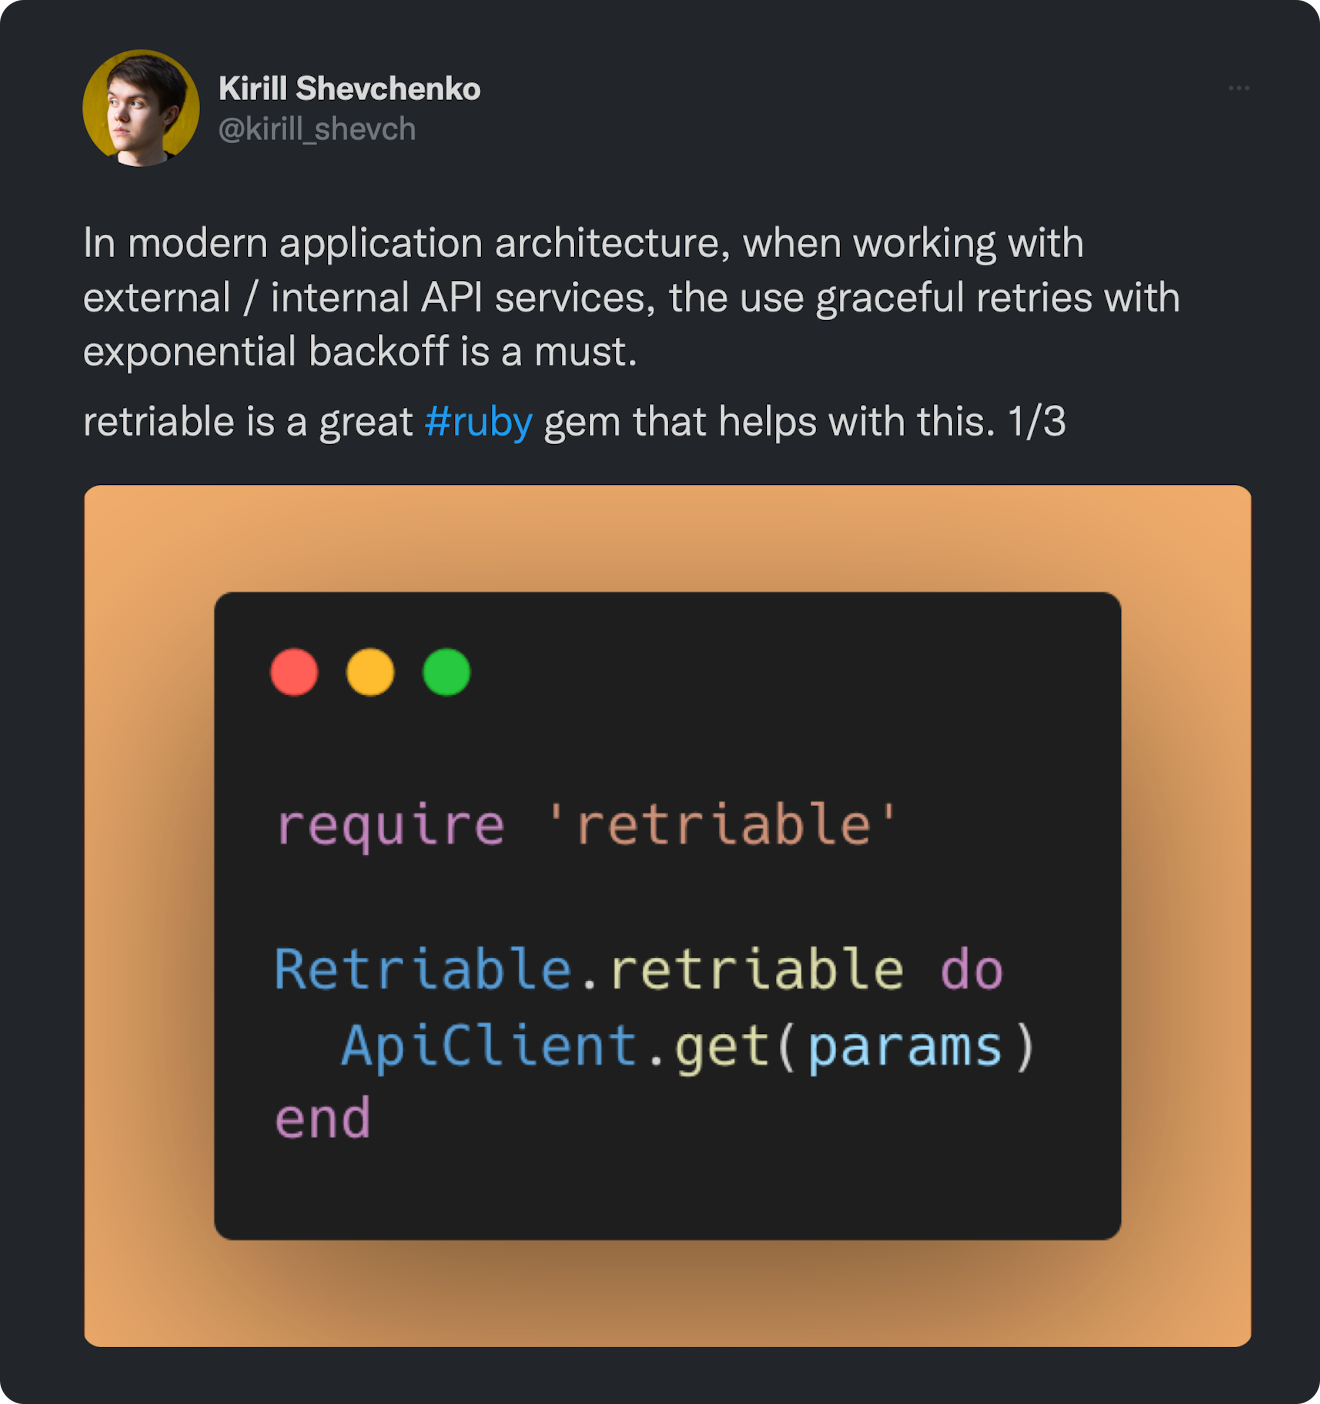 In modern application architecture, when working with external / internal API services, the use graceful retries with exponential backoff is a must. retriable is a great #ruby gem that helps with this.